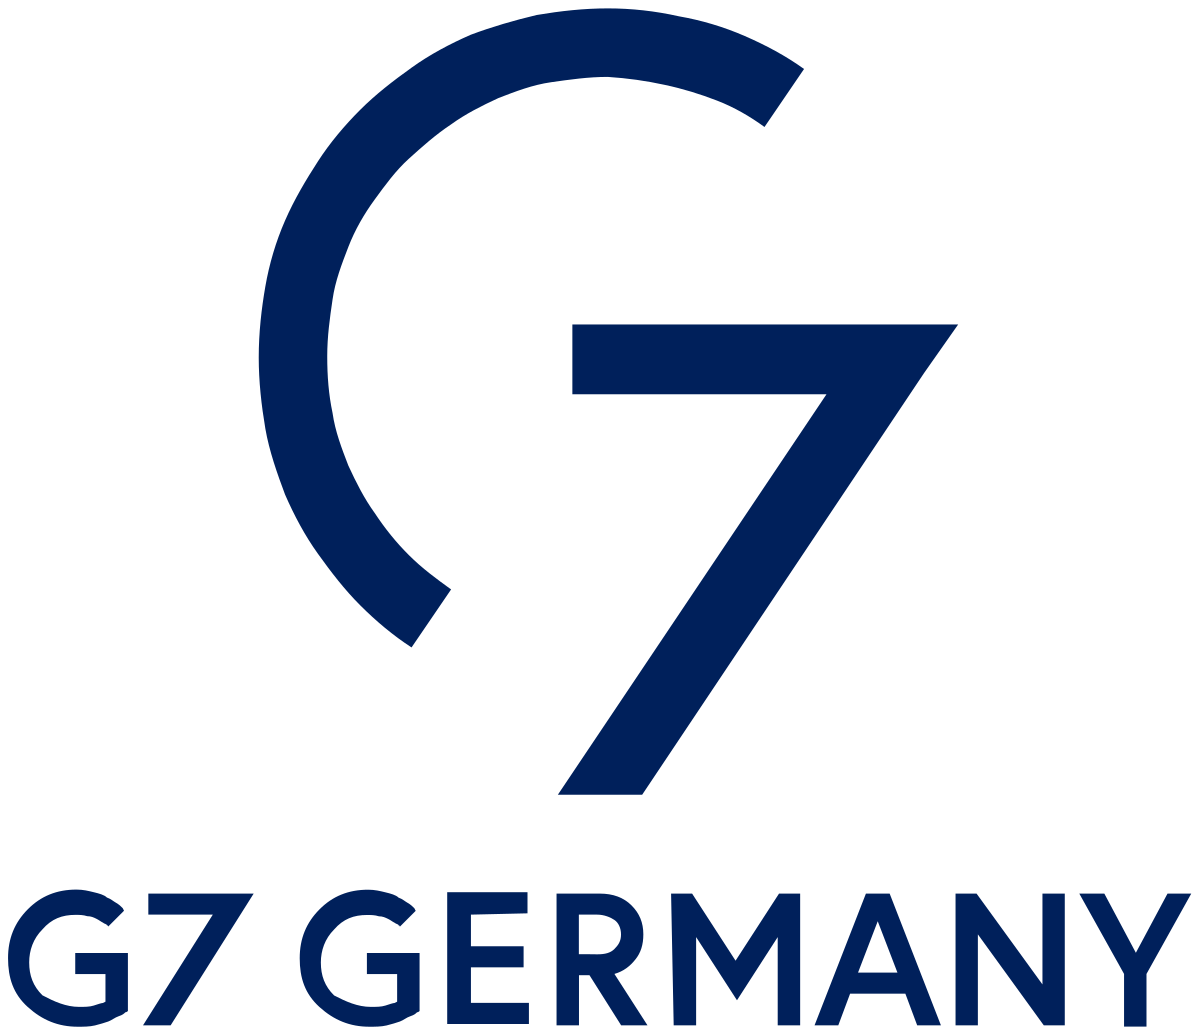 G7 remains committed to rules-based global order, respect others’ territorial integrity and sovereignty